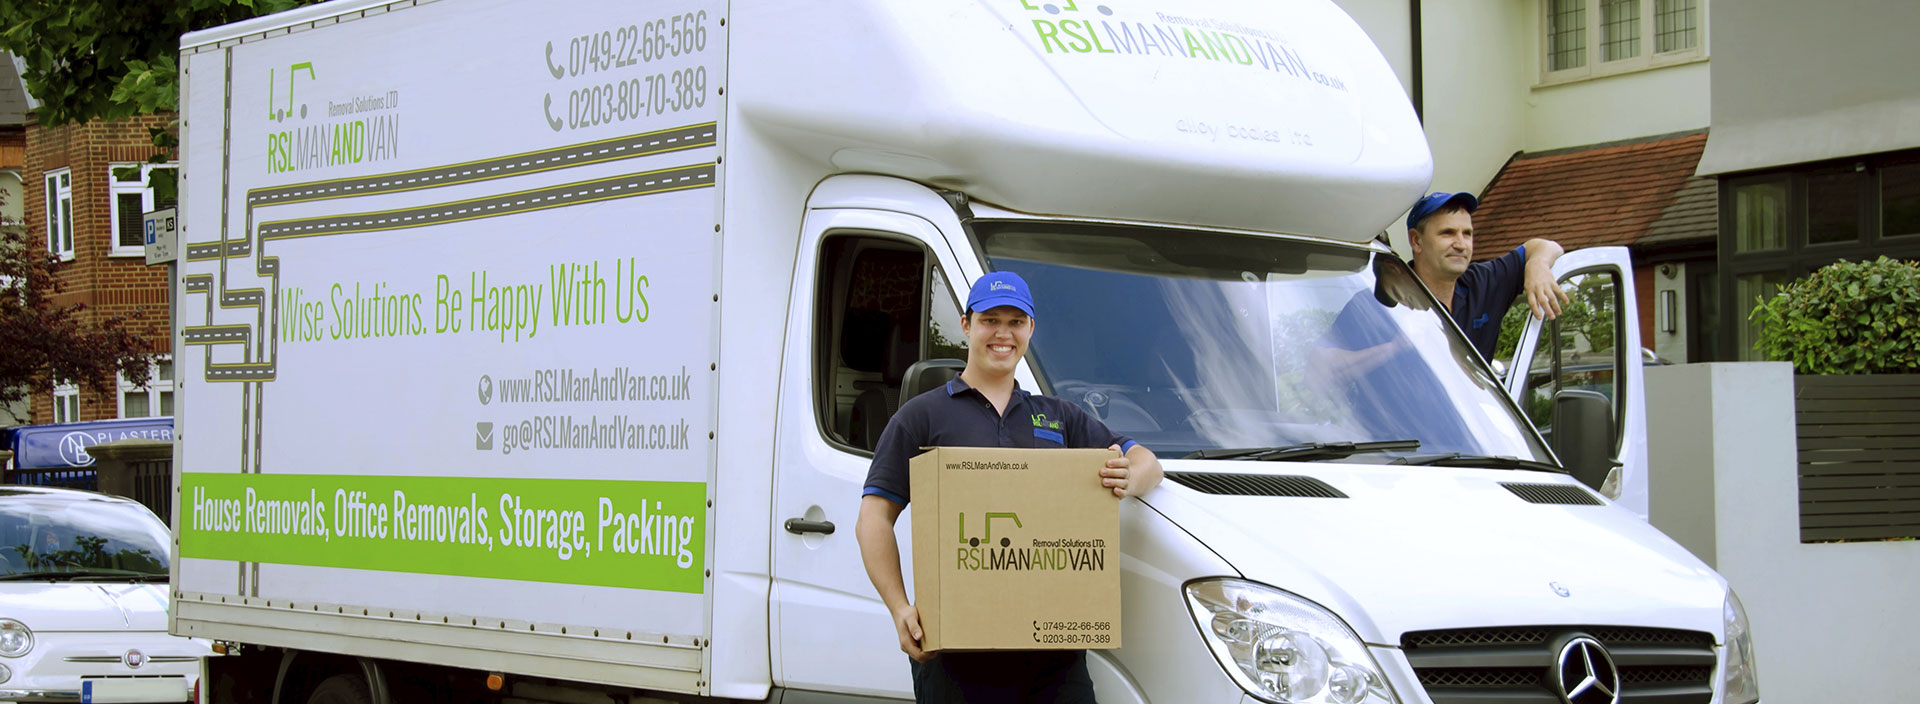 Man and van  services  London